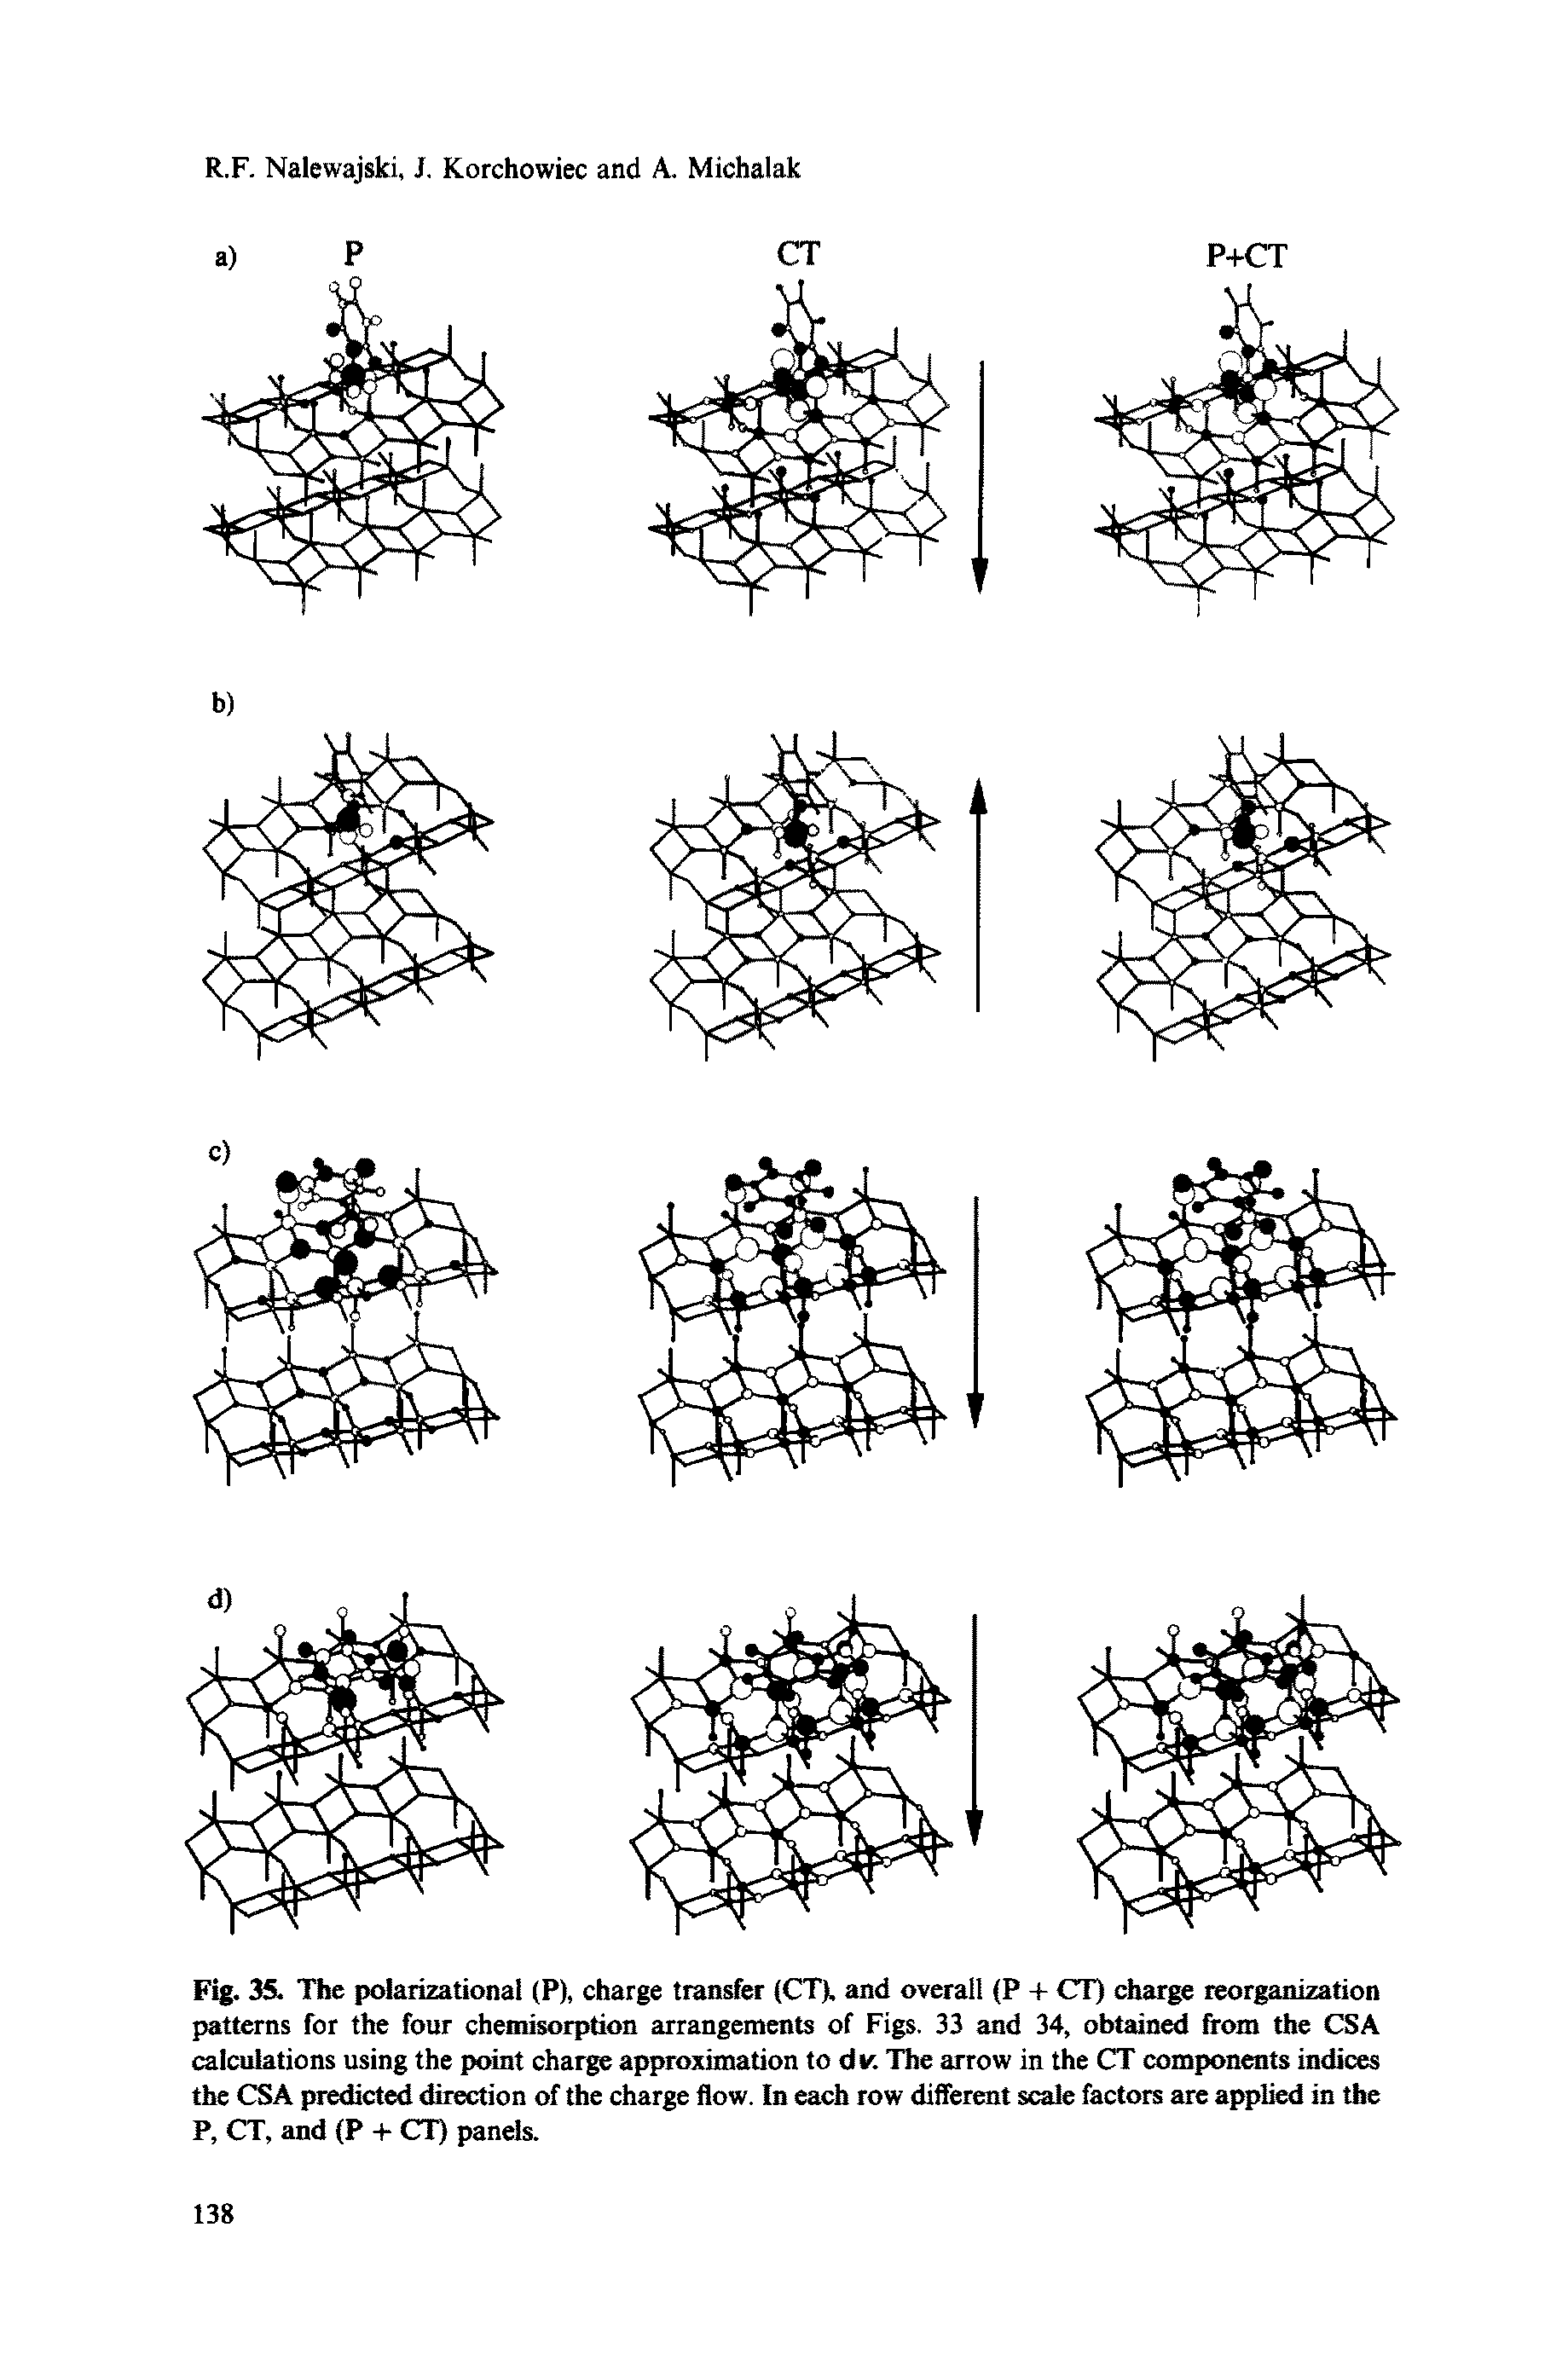 Fig. 35. The polarizational (P), charge transfer (CT), and overall (P + CT) charge reorganization patterns for the four chemisorption arrangements of Figs. 33 and 34, obtained from the CSA calculations using the point charge approximation to dir. The arrow in the CT components indices the CSA predicted direction of the charge flow. In each row different scale factors are applied in the P, CT, and (P + CT) panels.